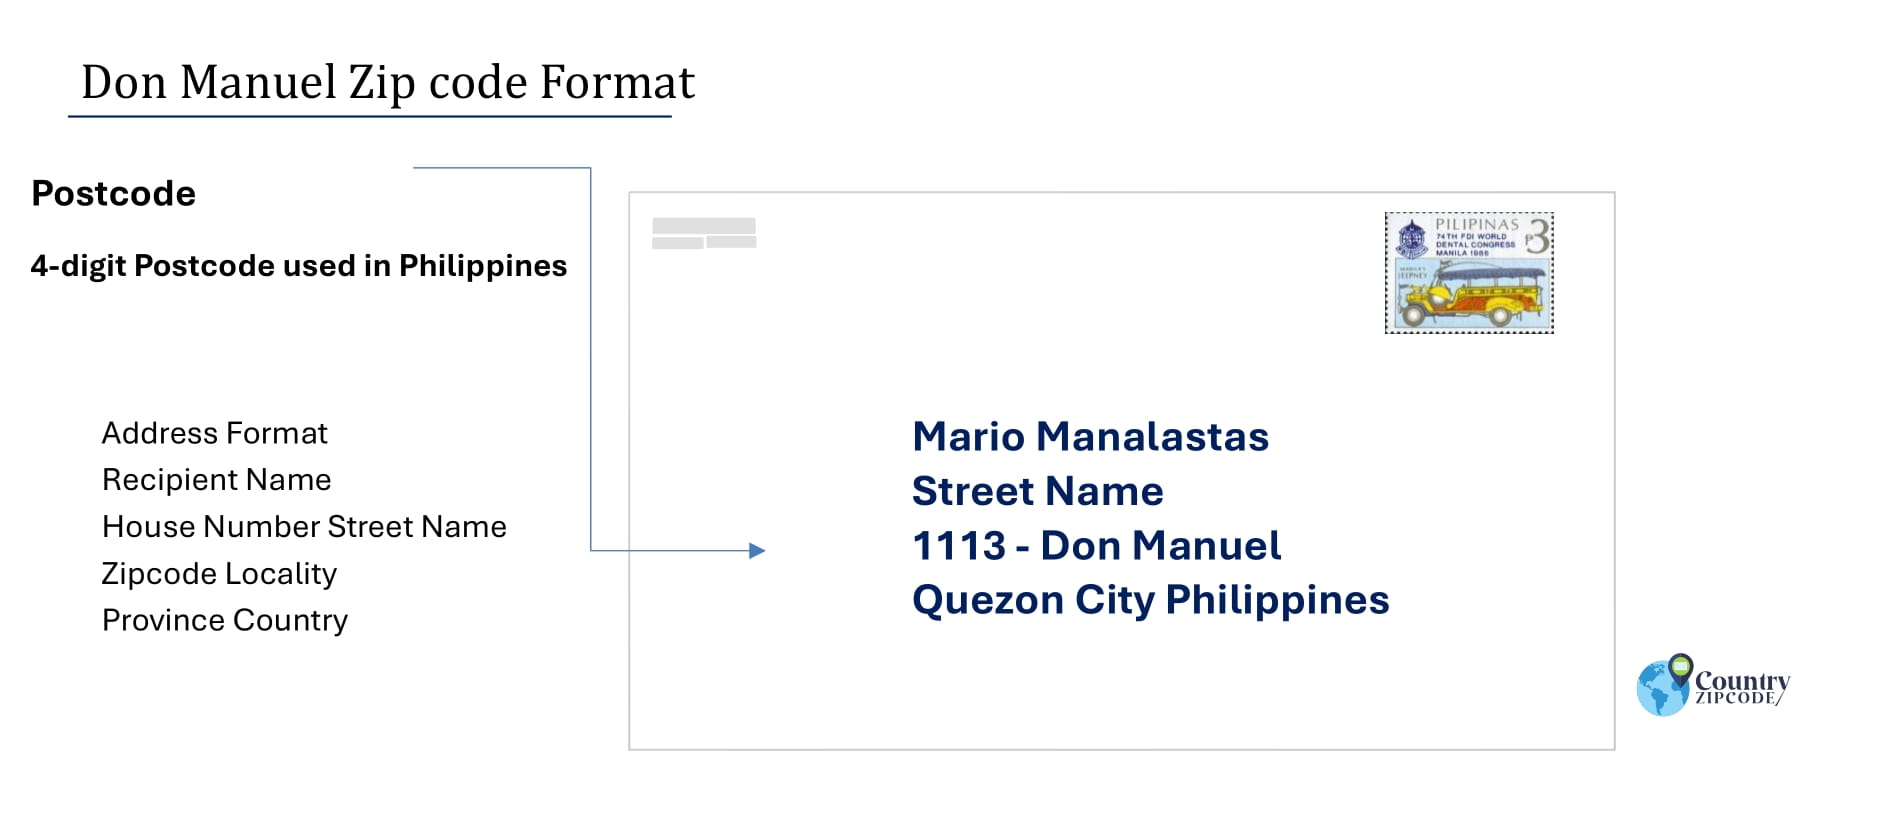 example of Don Manuel Philippines zip code and address format